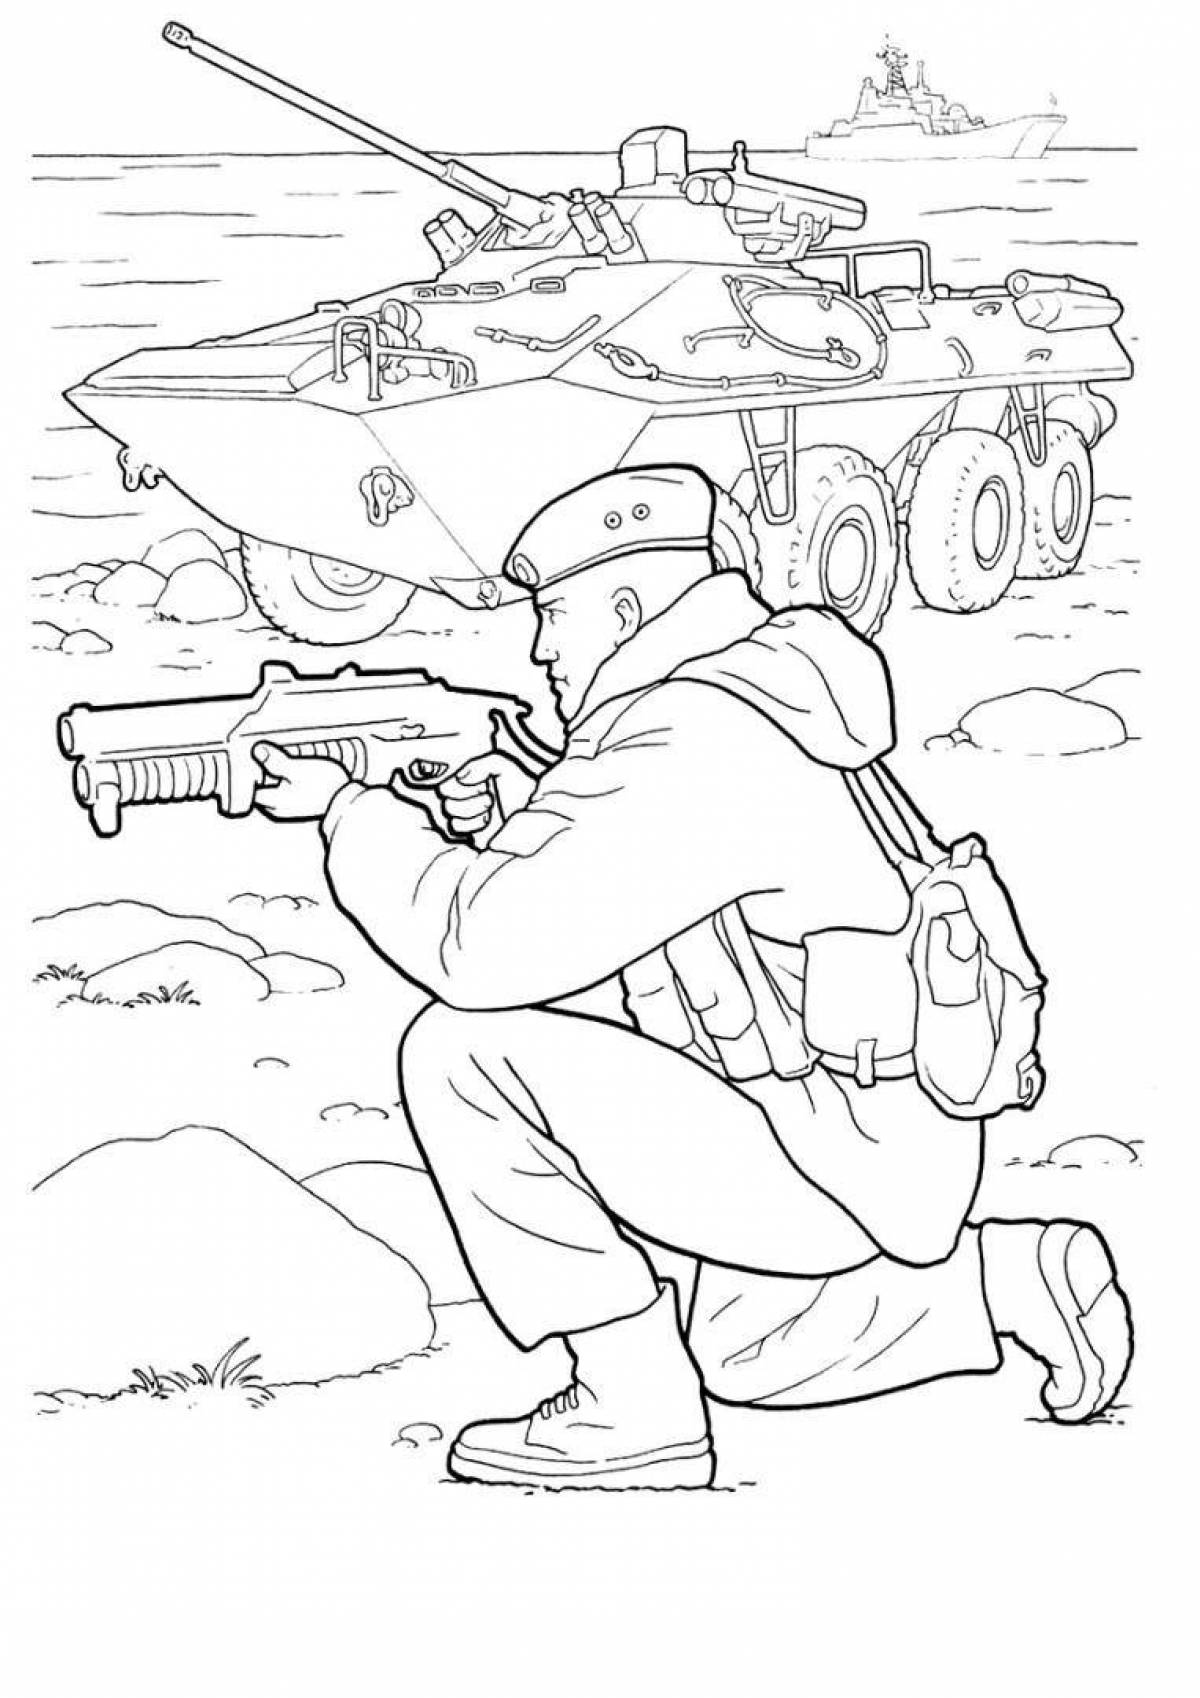 Awesome soldier coloring pages for 6-7 year olds